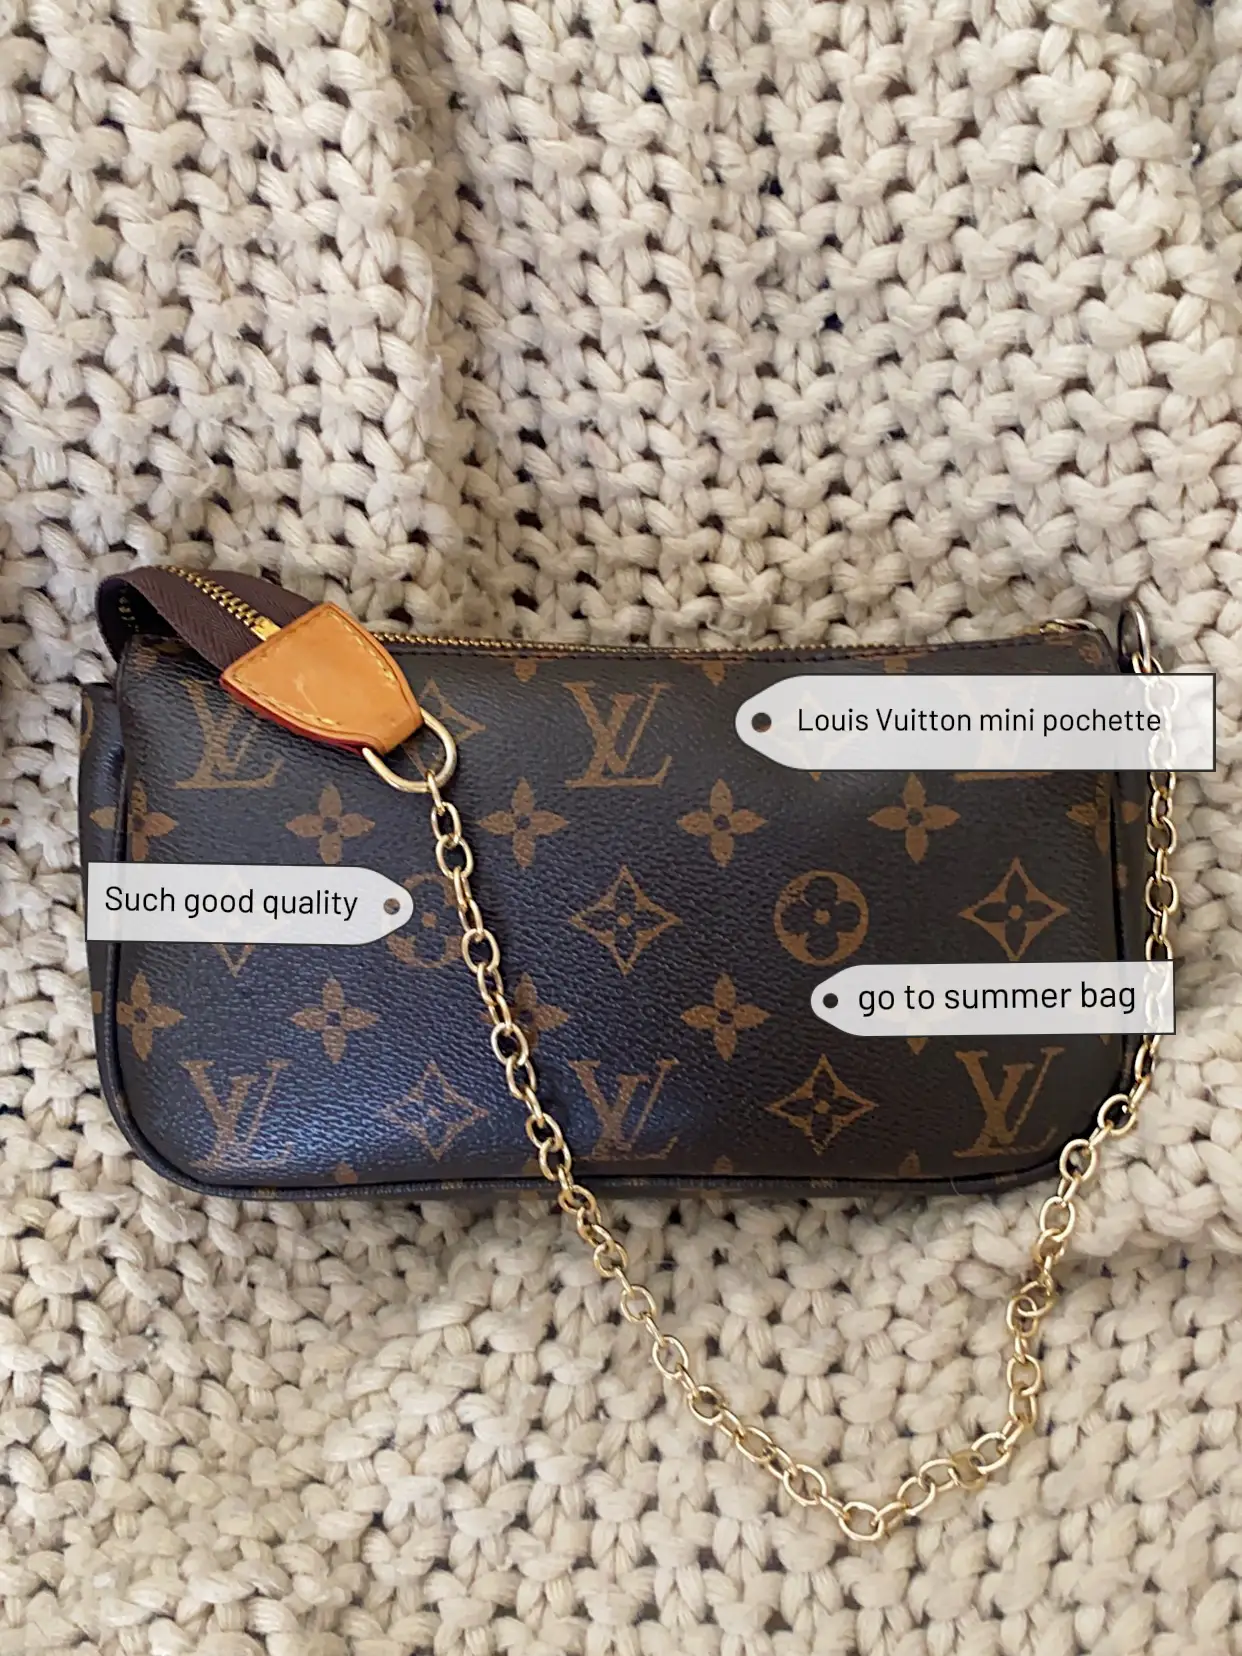 How to search on DHgate Louis Vuitton Wallets Haul 